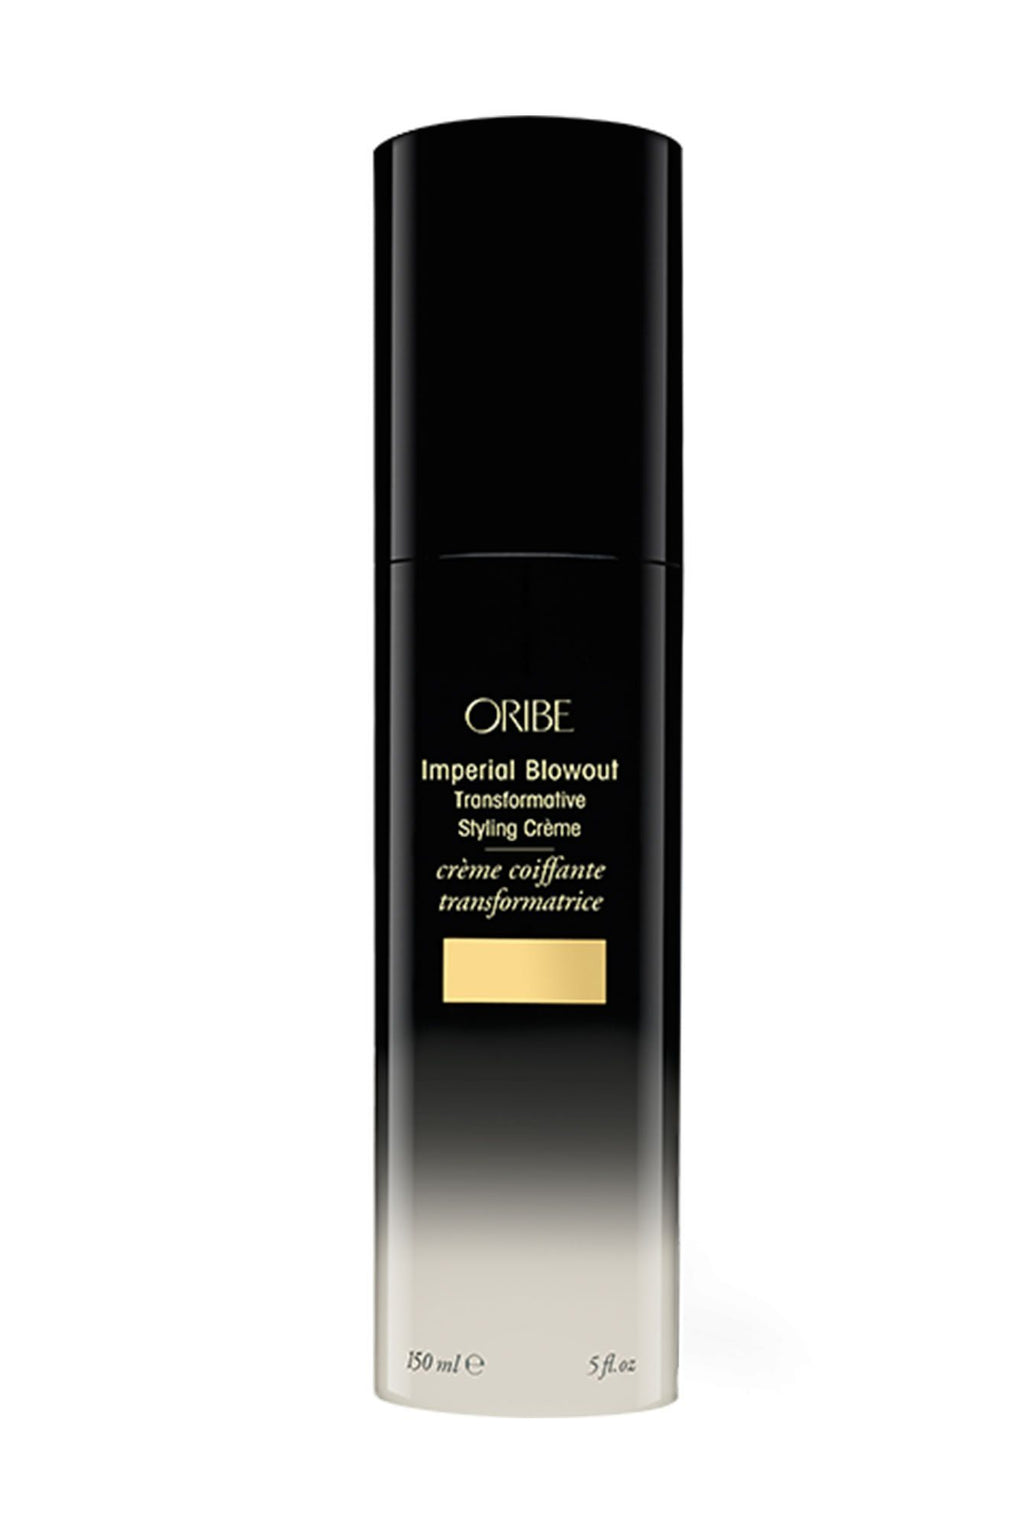 ORIBE | Imperial Blowout Transformative Styling Creme